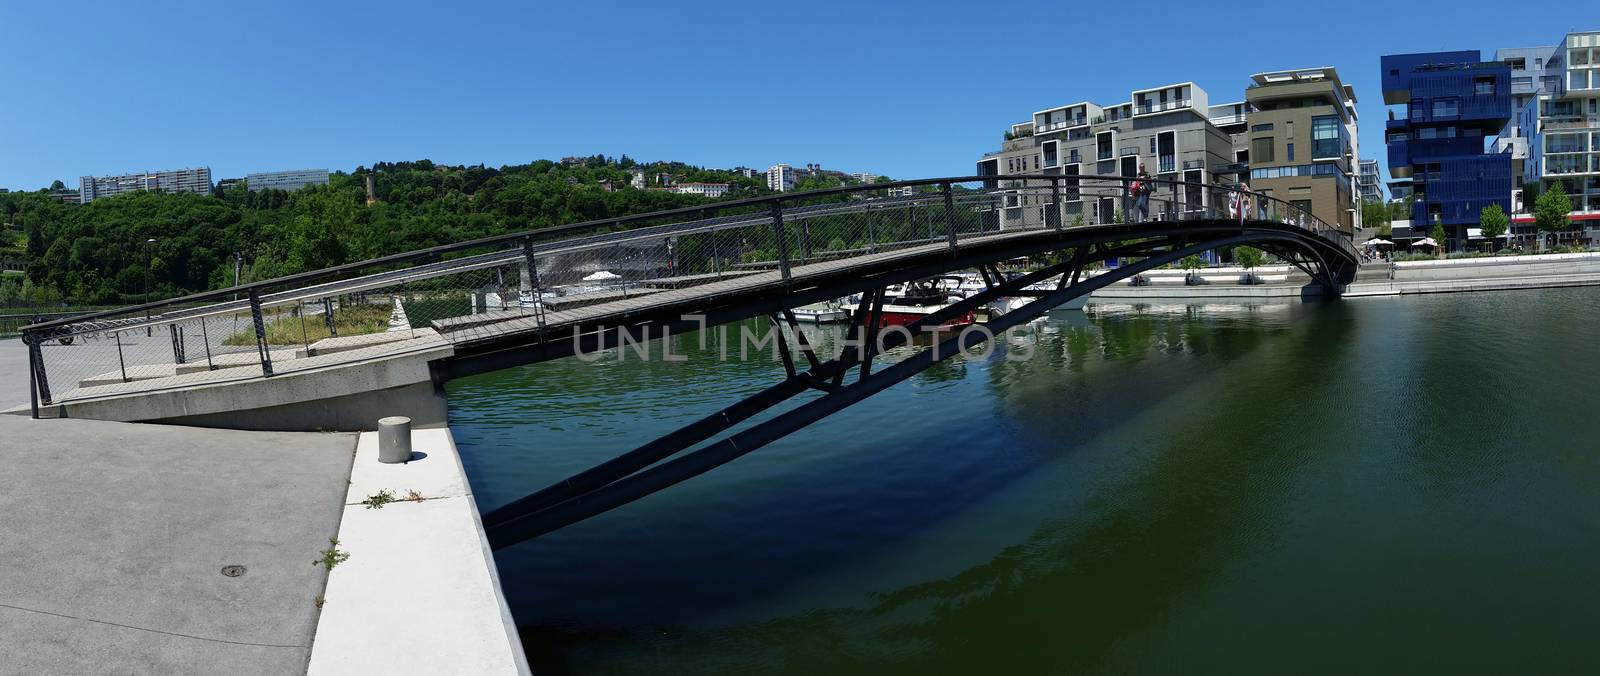 Panoramic view of a bridge in Confluence by bensib